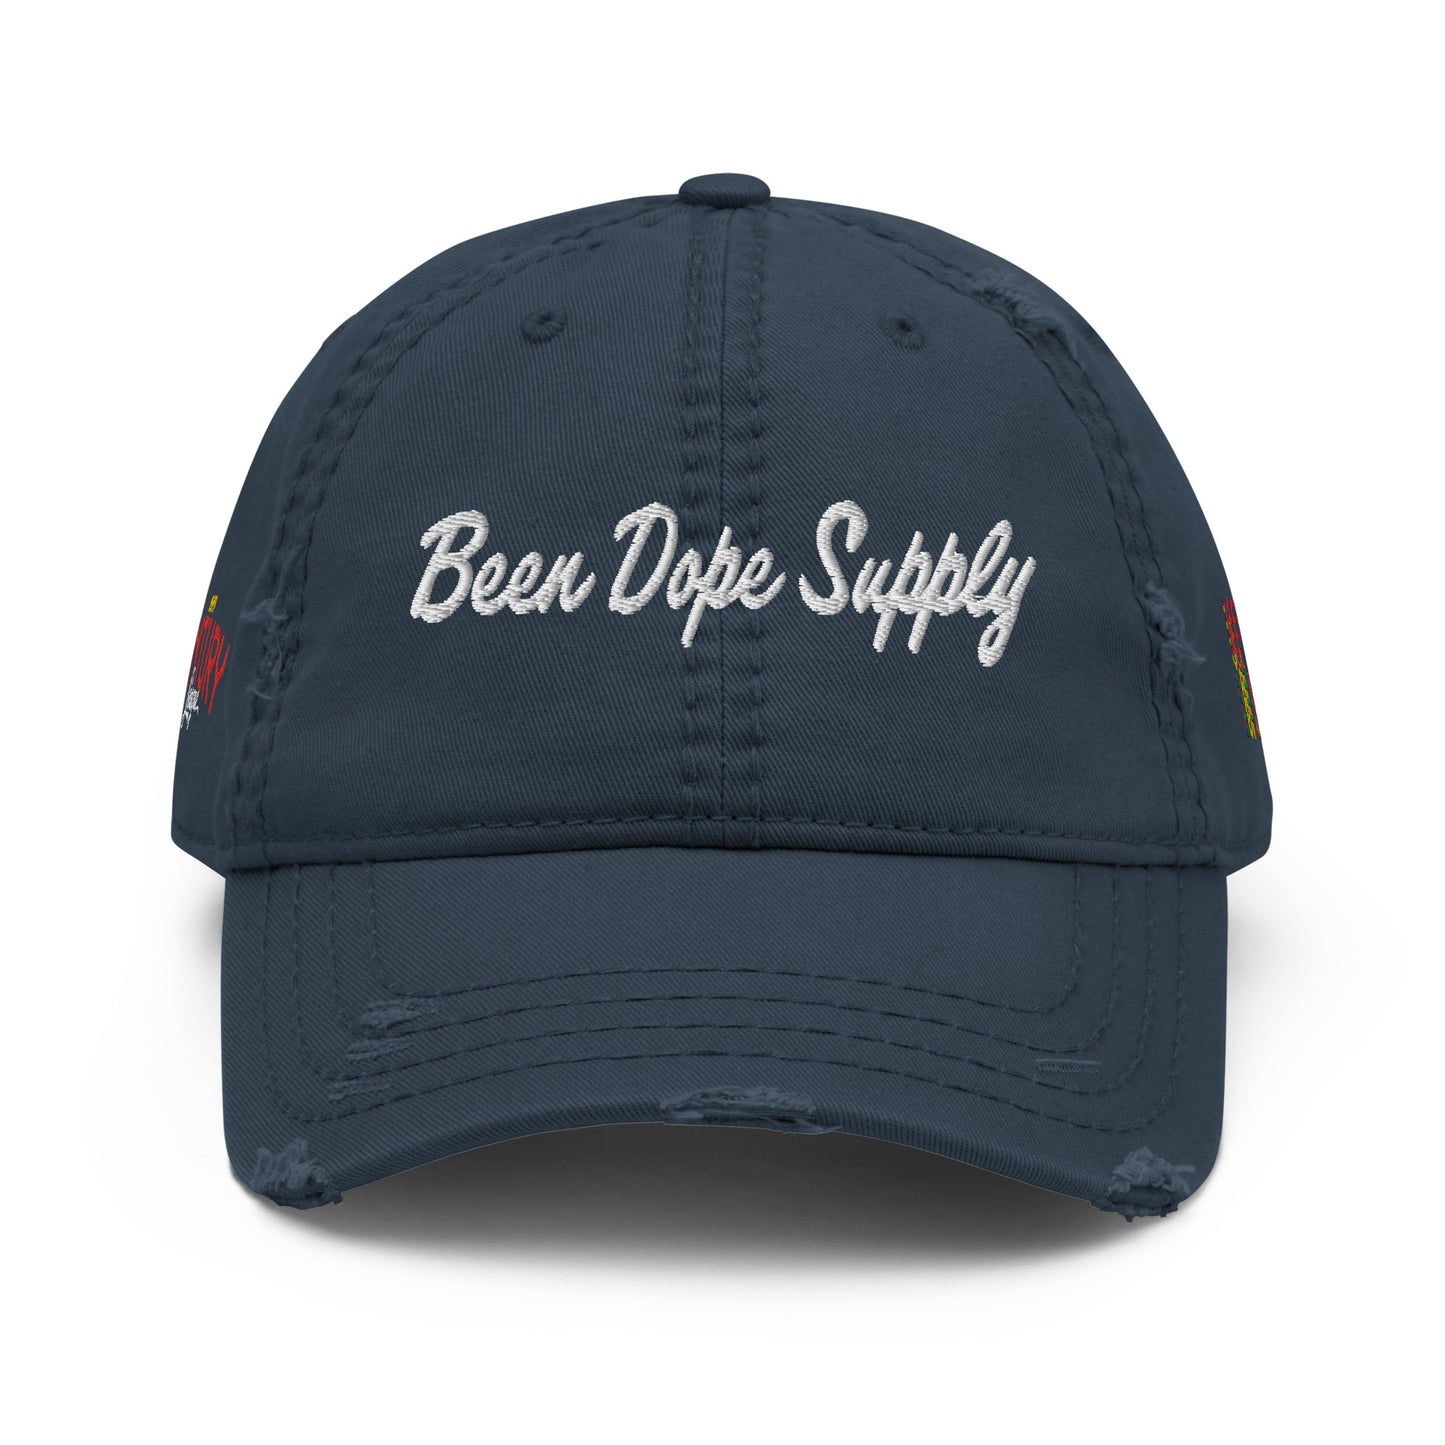 Been Dope Supply | Distressed Navy Dad Hat | Embroidered